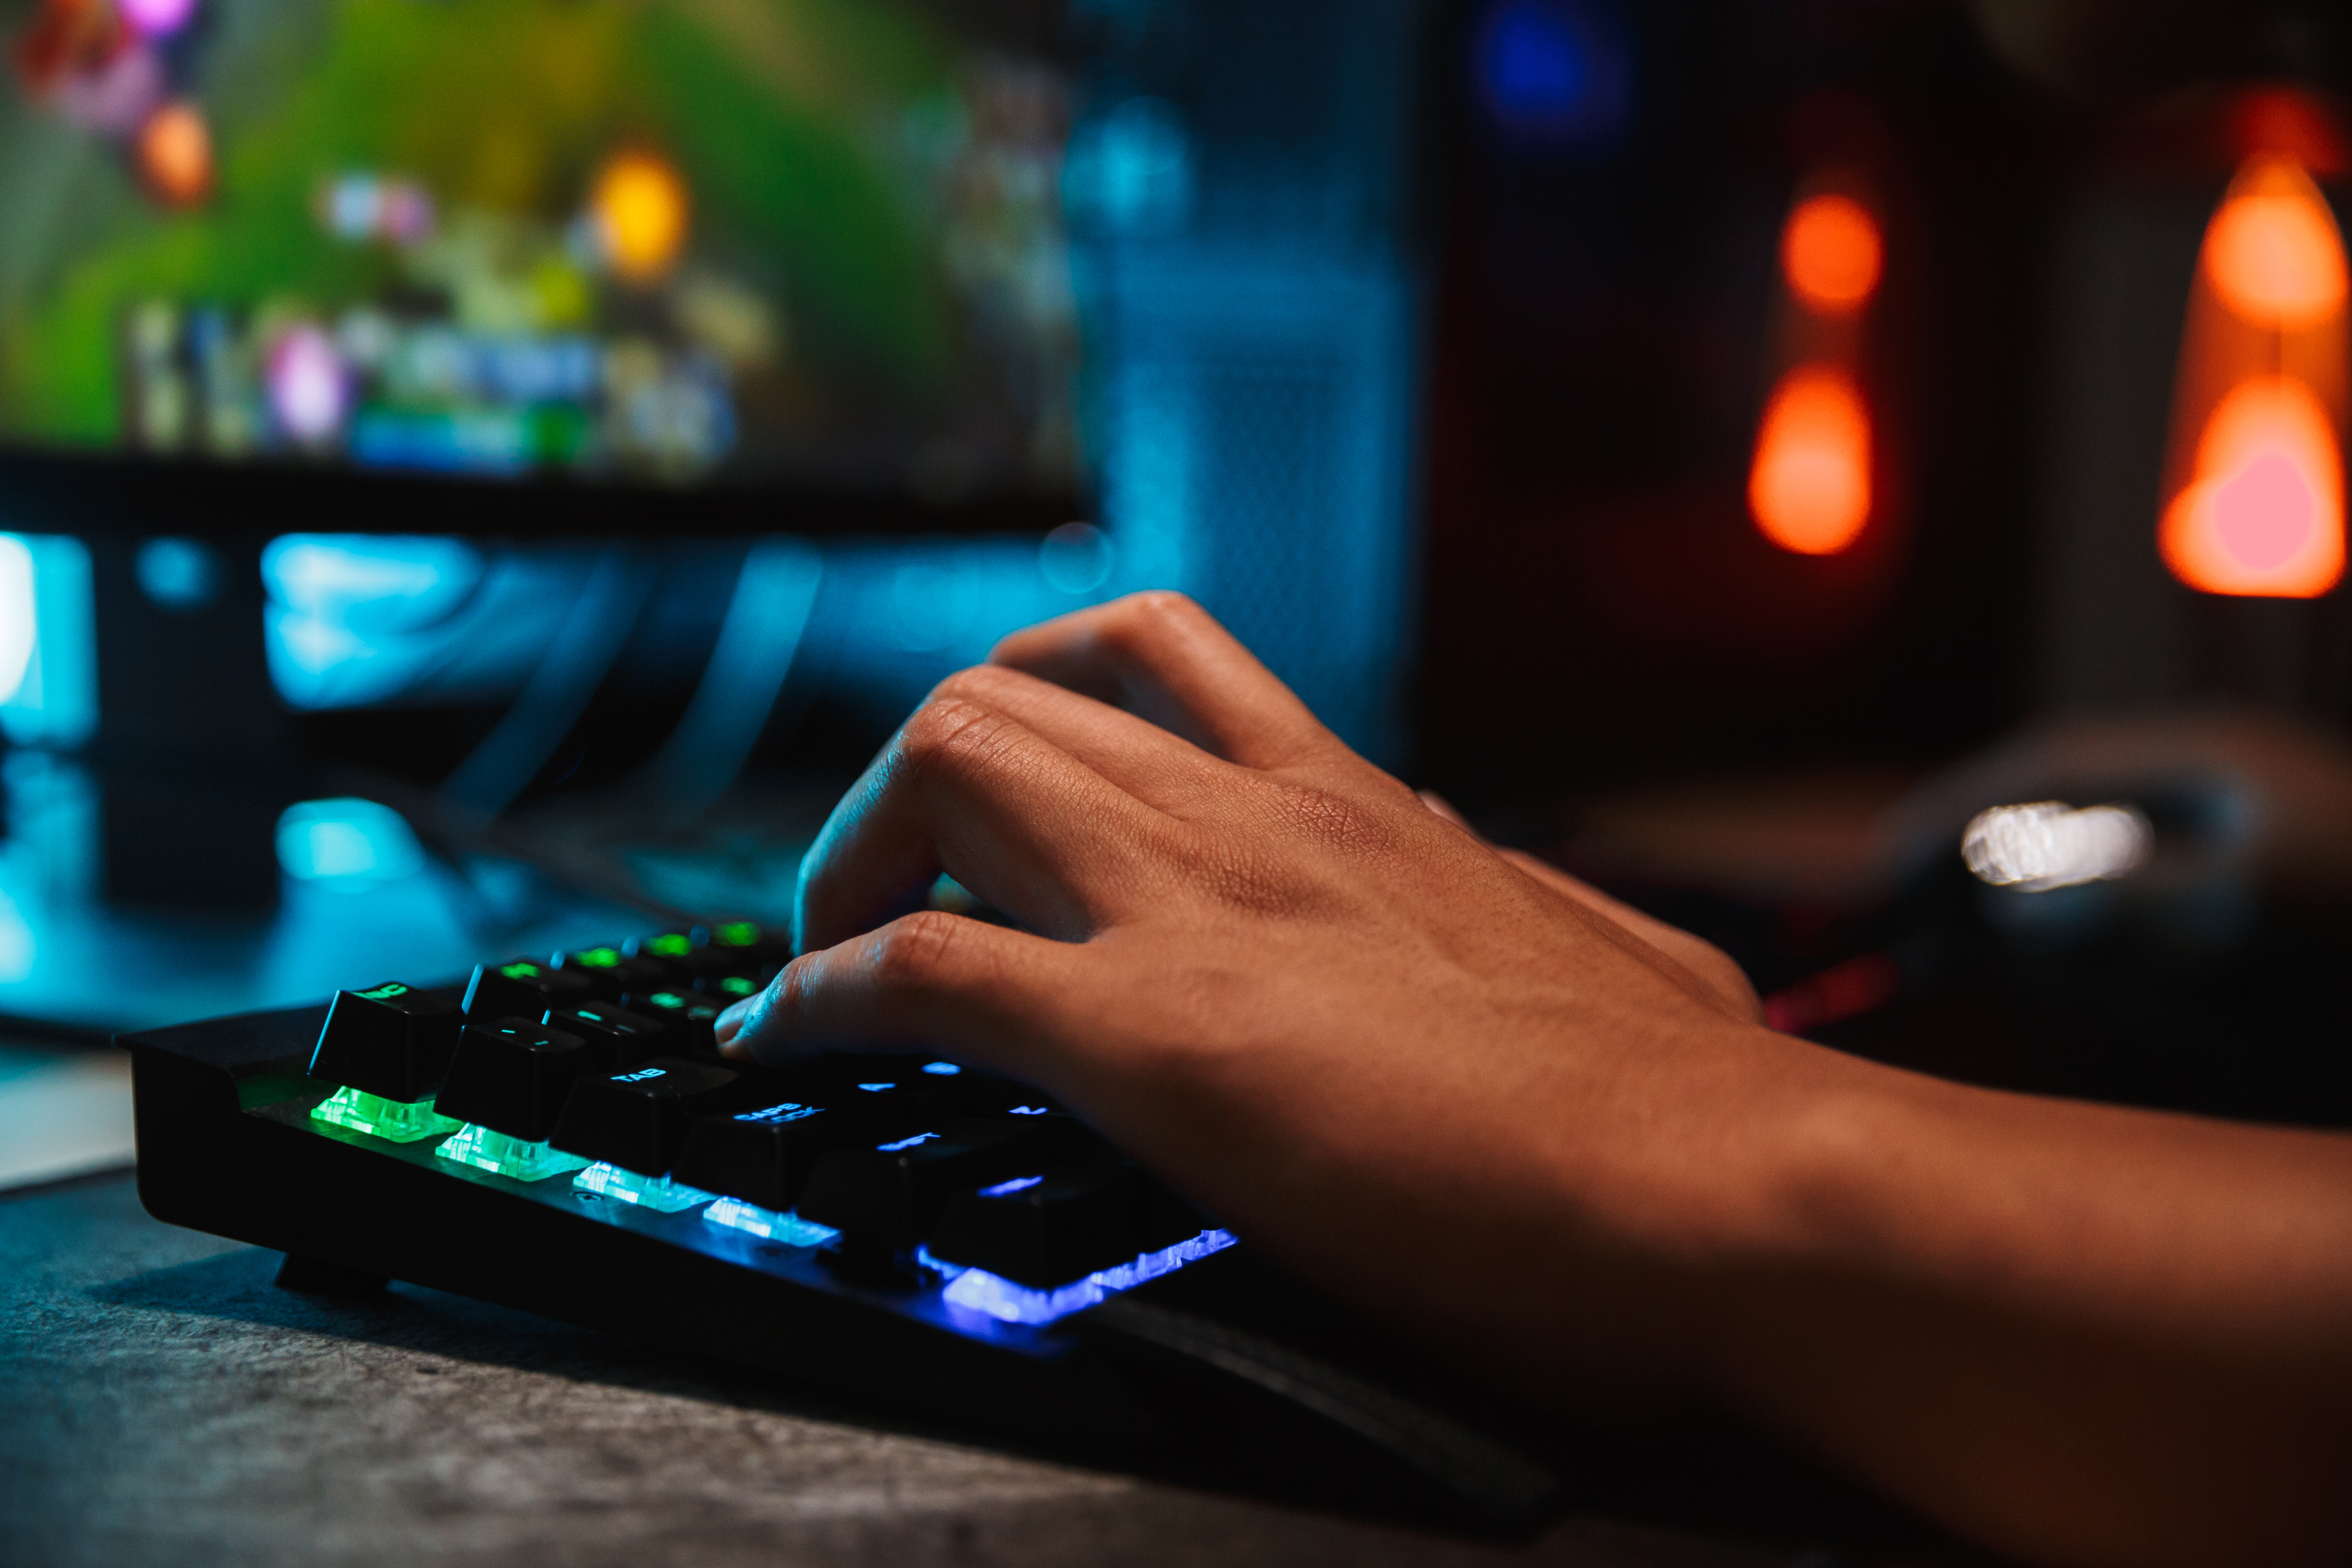 Image of a person hands on an illuminated keyboard in front of an out-of-focus computer displaying a video game